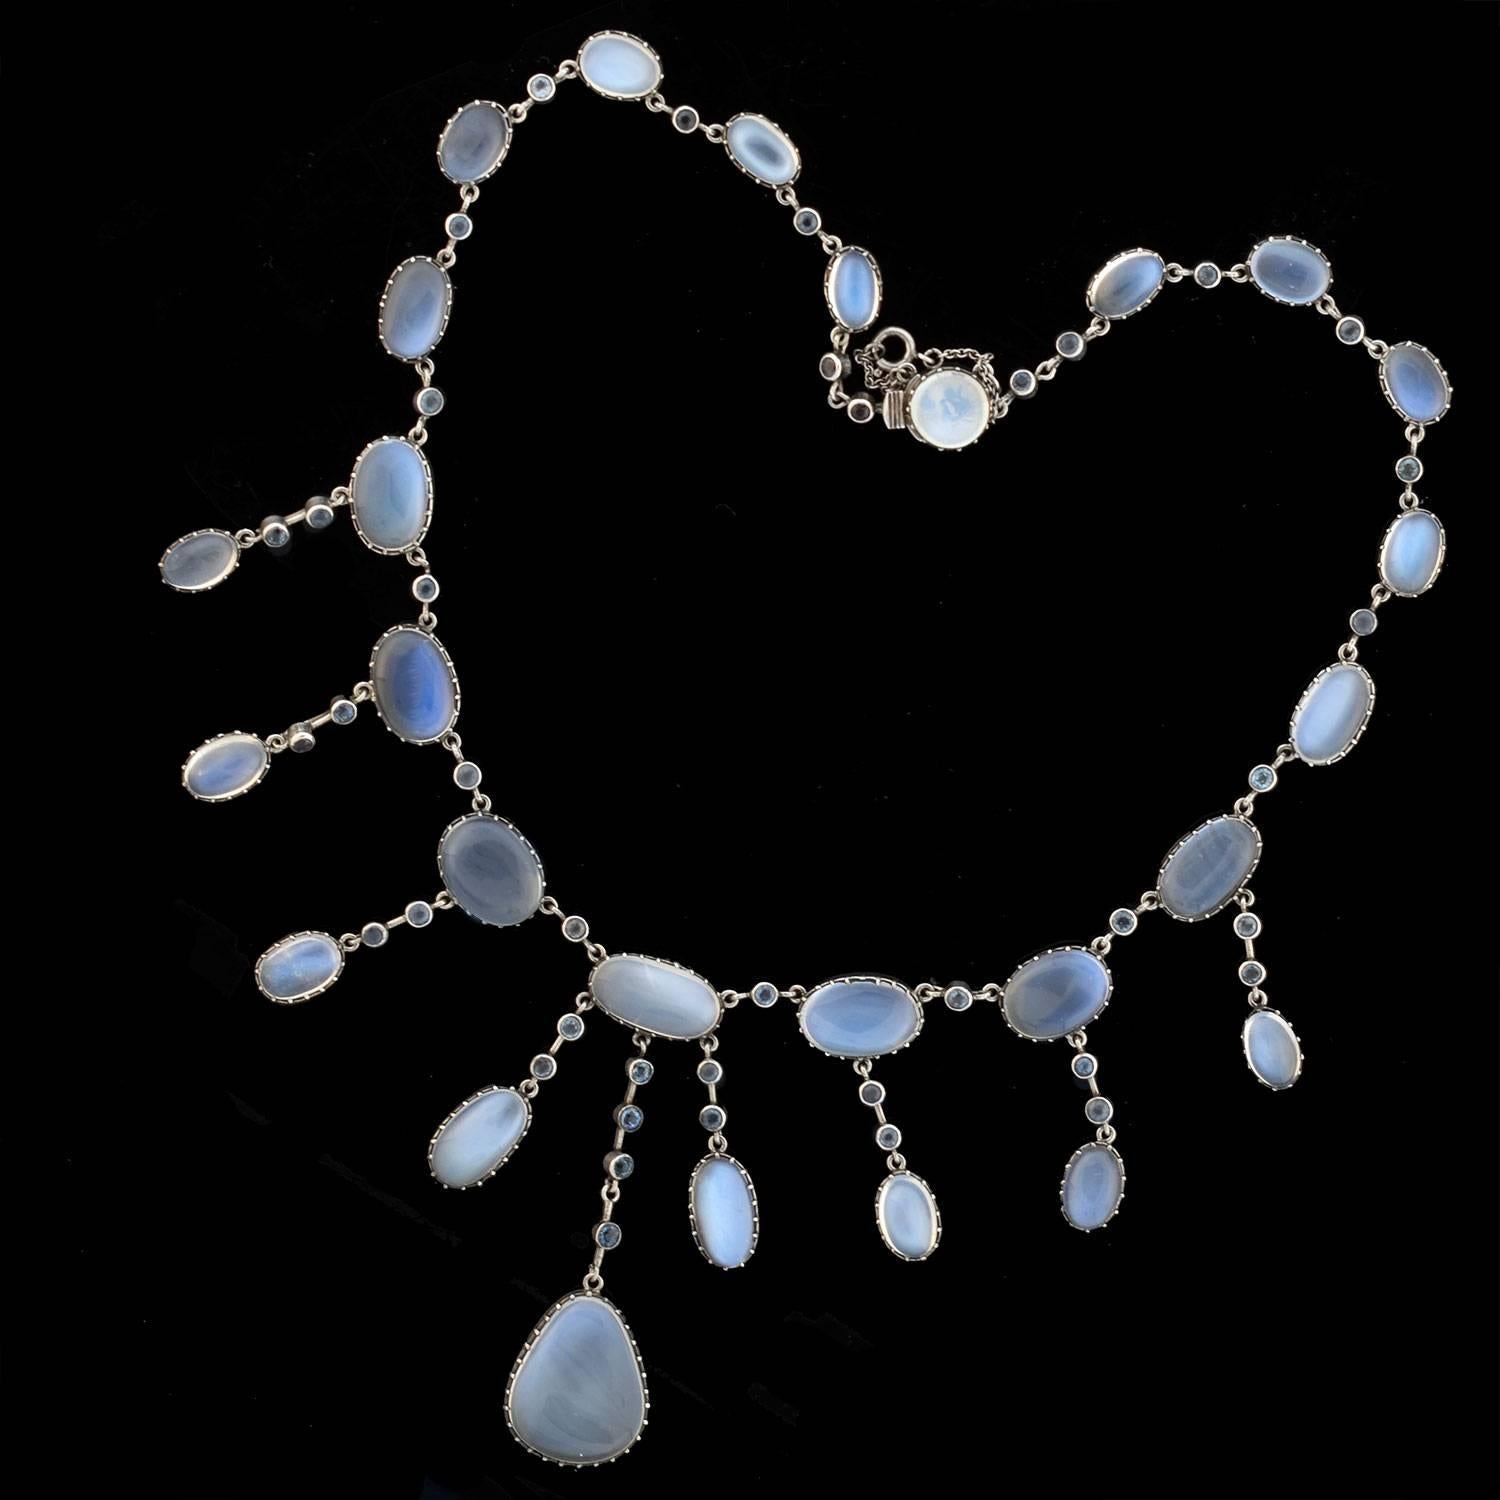 A dramatic festoon moonstone necklace from the Arts & Crafts era (ca1910)! This incredible piece is crafted in sterling silver and comprised of stunning moonstone and aquamarine links that form an elegant festoon necklace. The necklace displays a